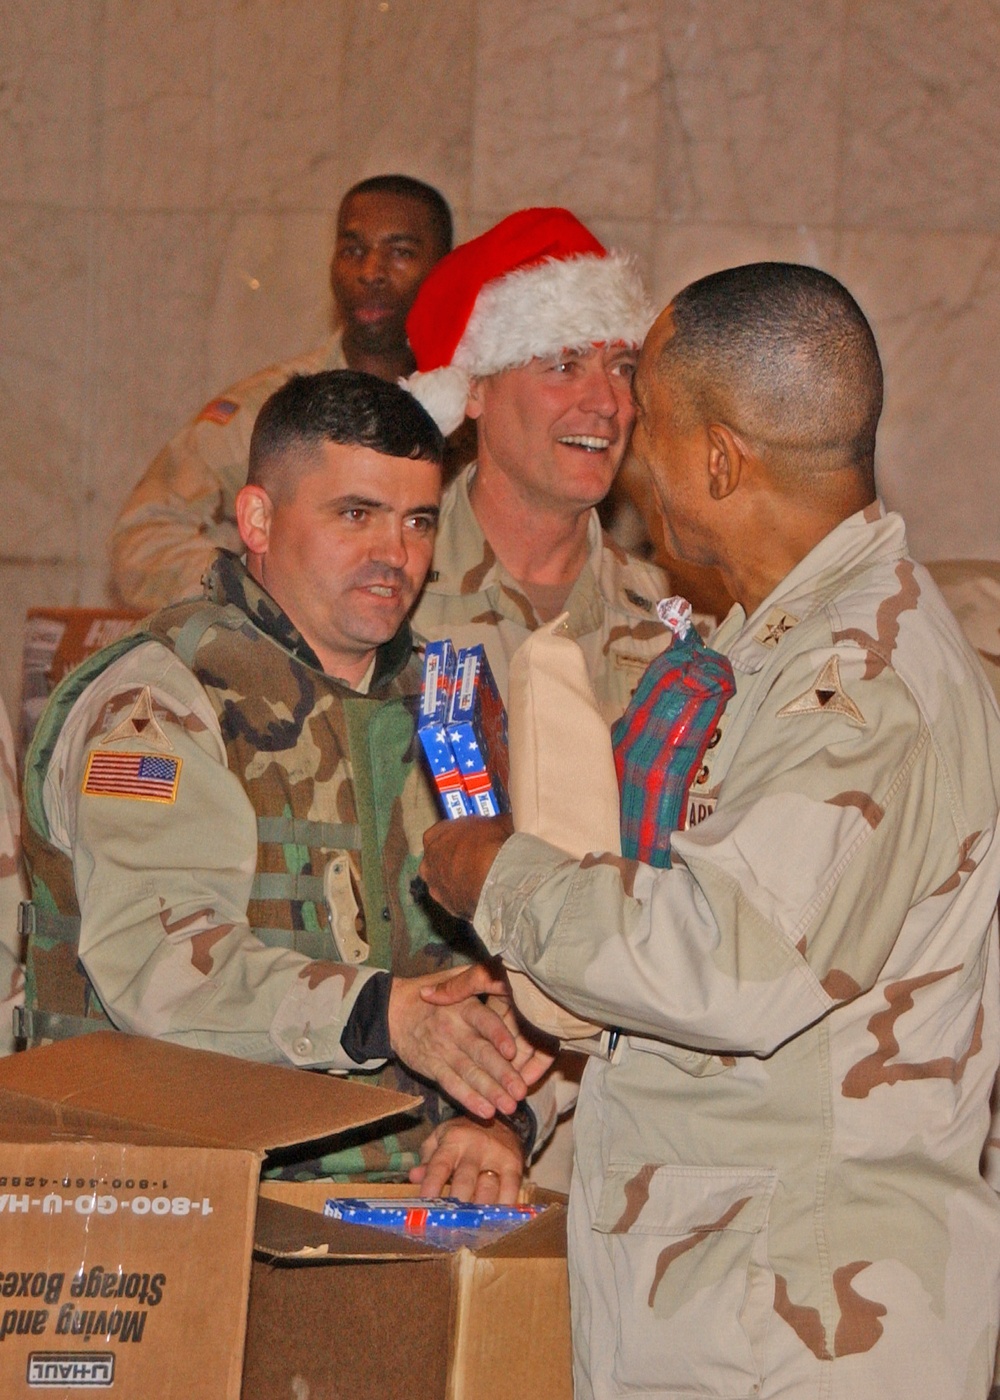 Sgt. Maj. Mellinger is jolly with his red hat